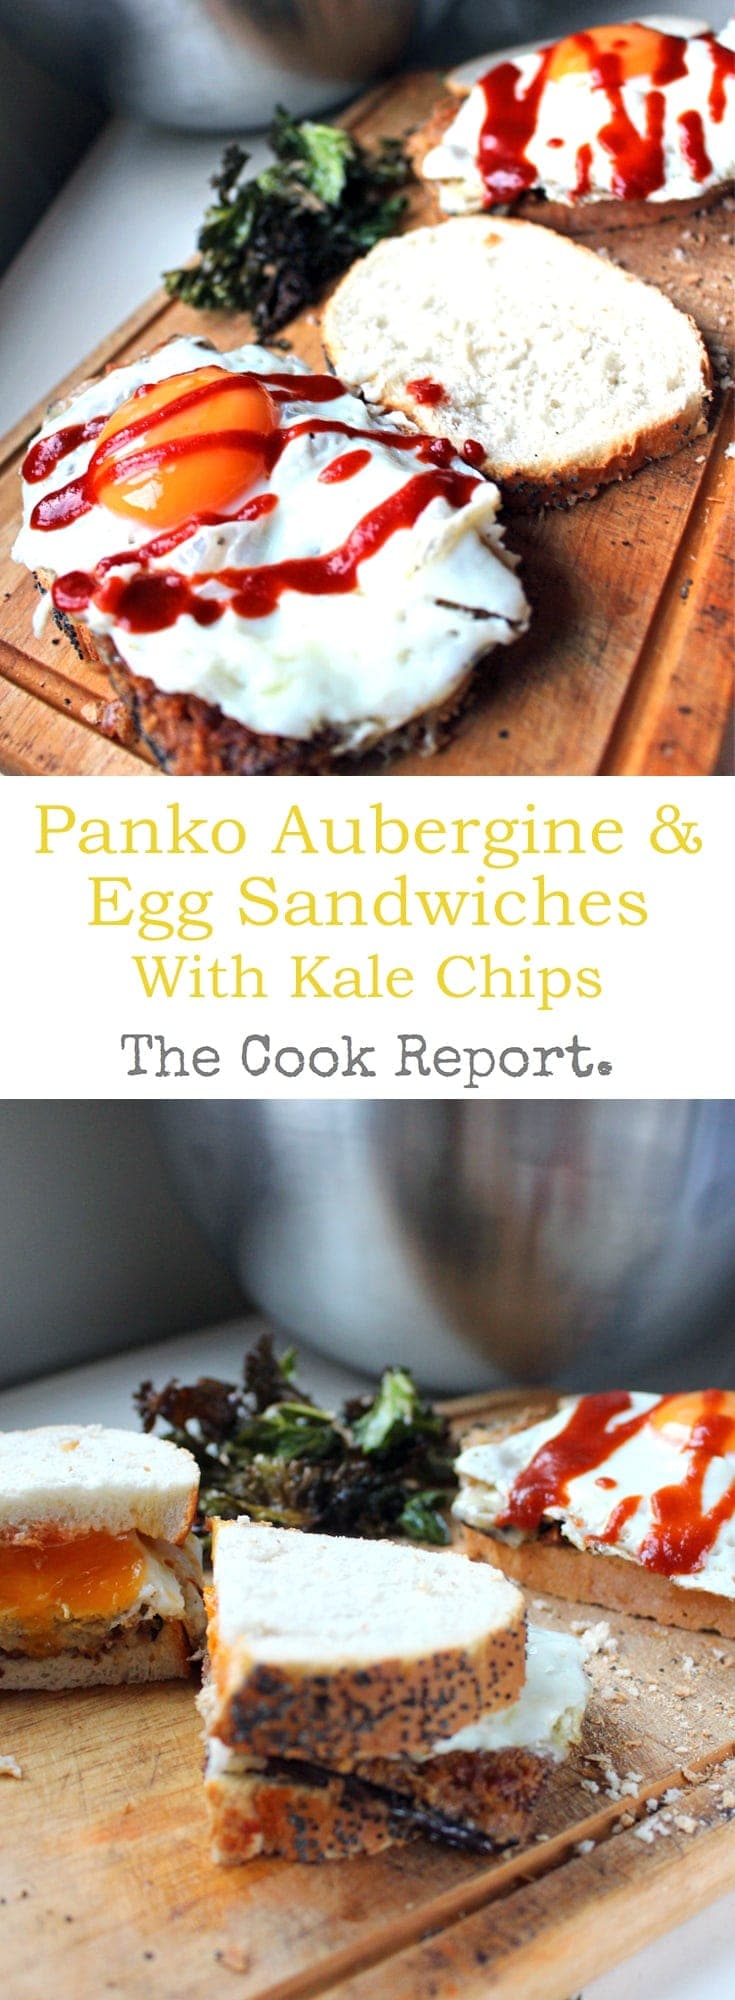 This Panko Aubergine & Egg Sandwich with kale chips is a delicious vegetarian meal which works at any time of day.